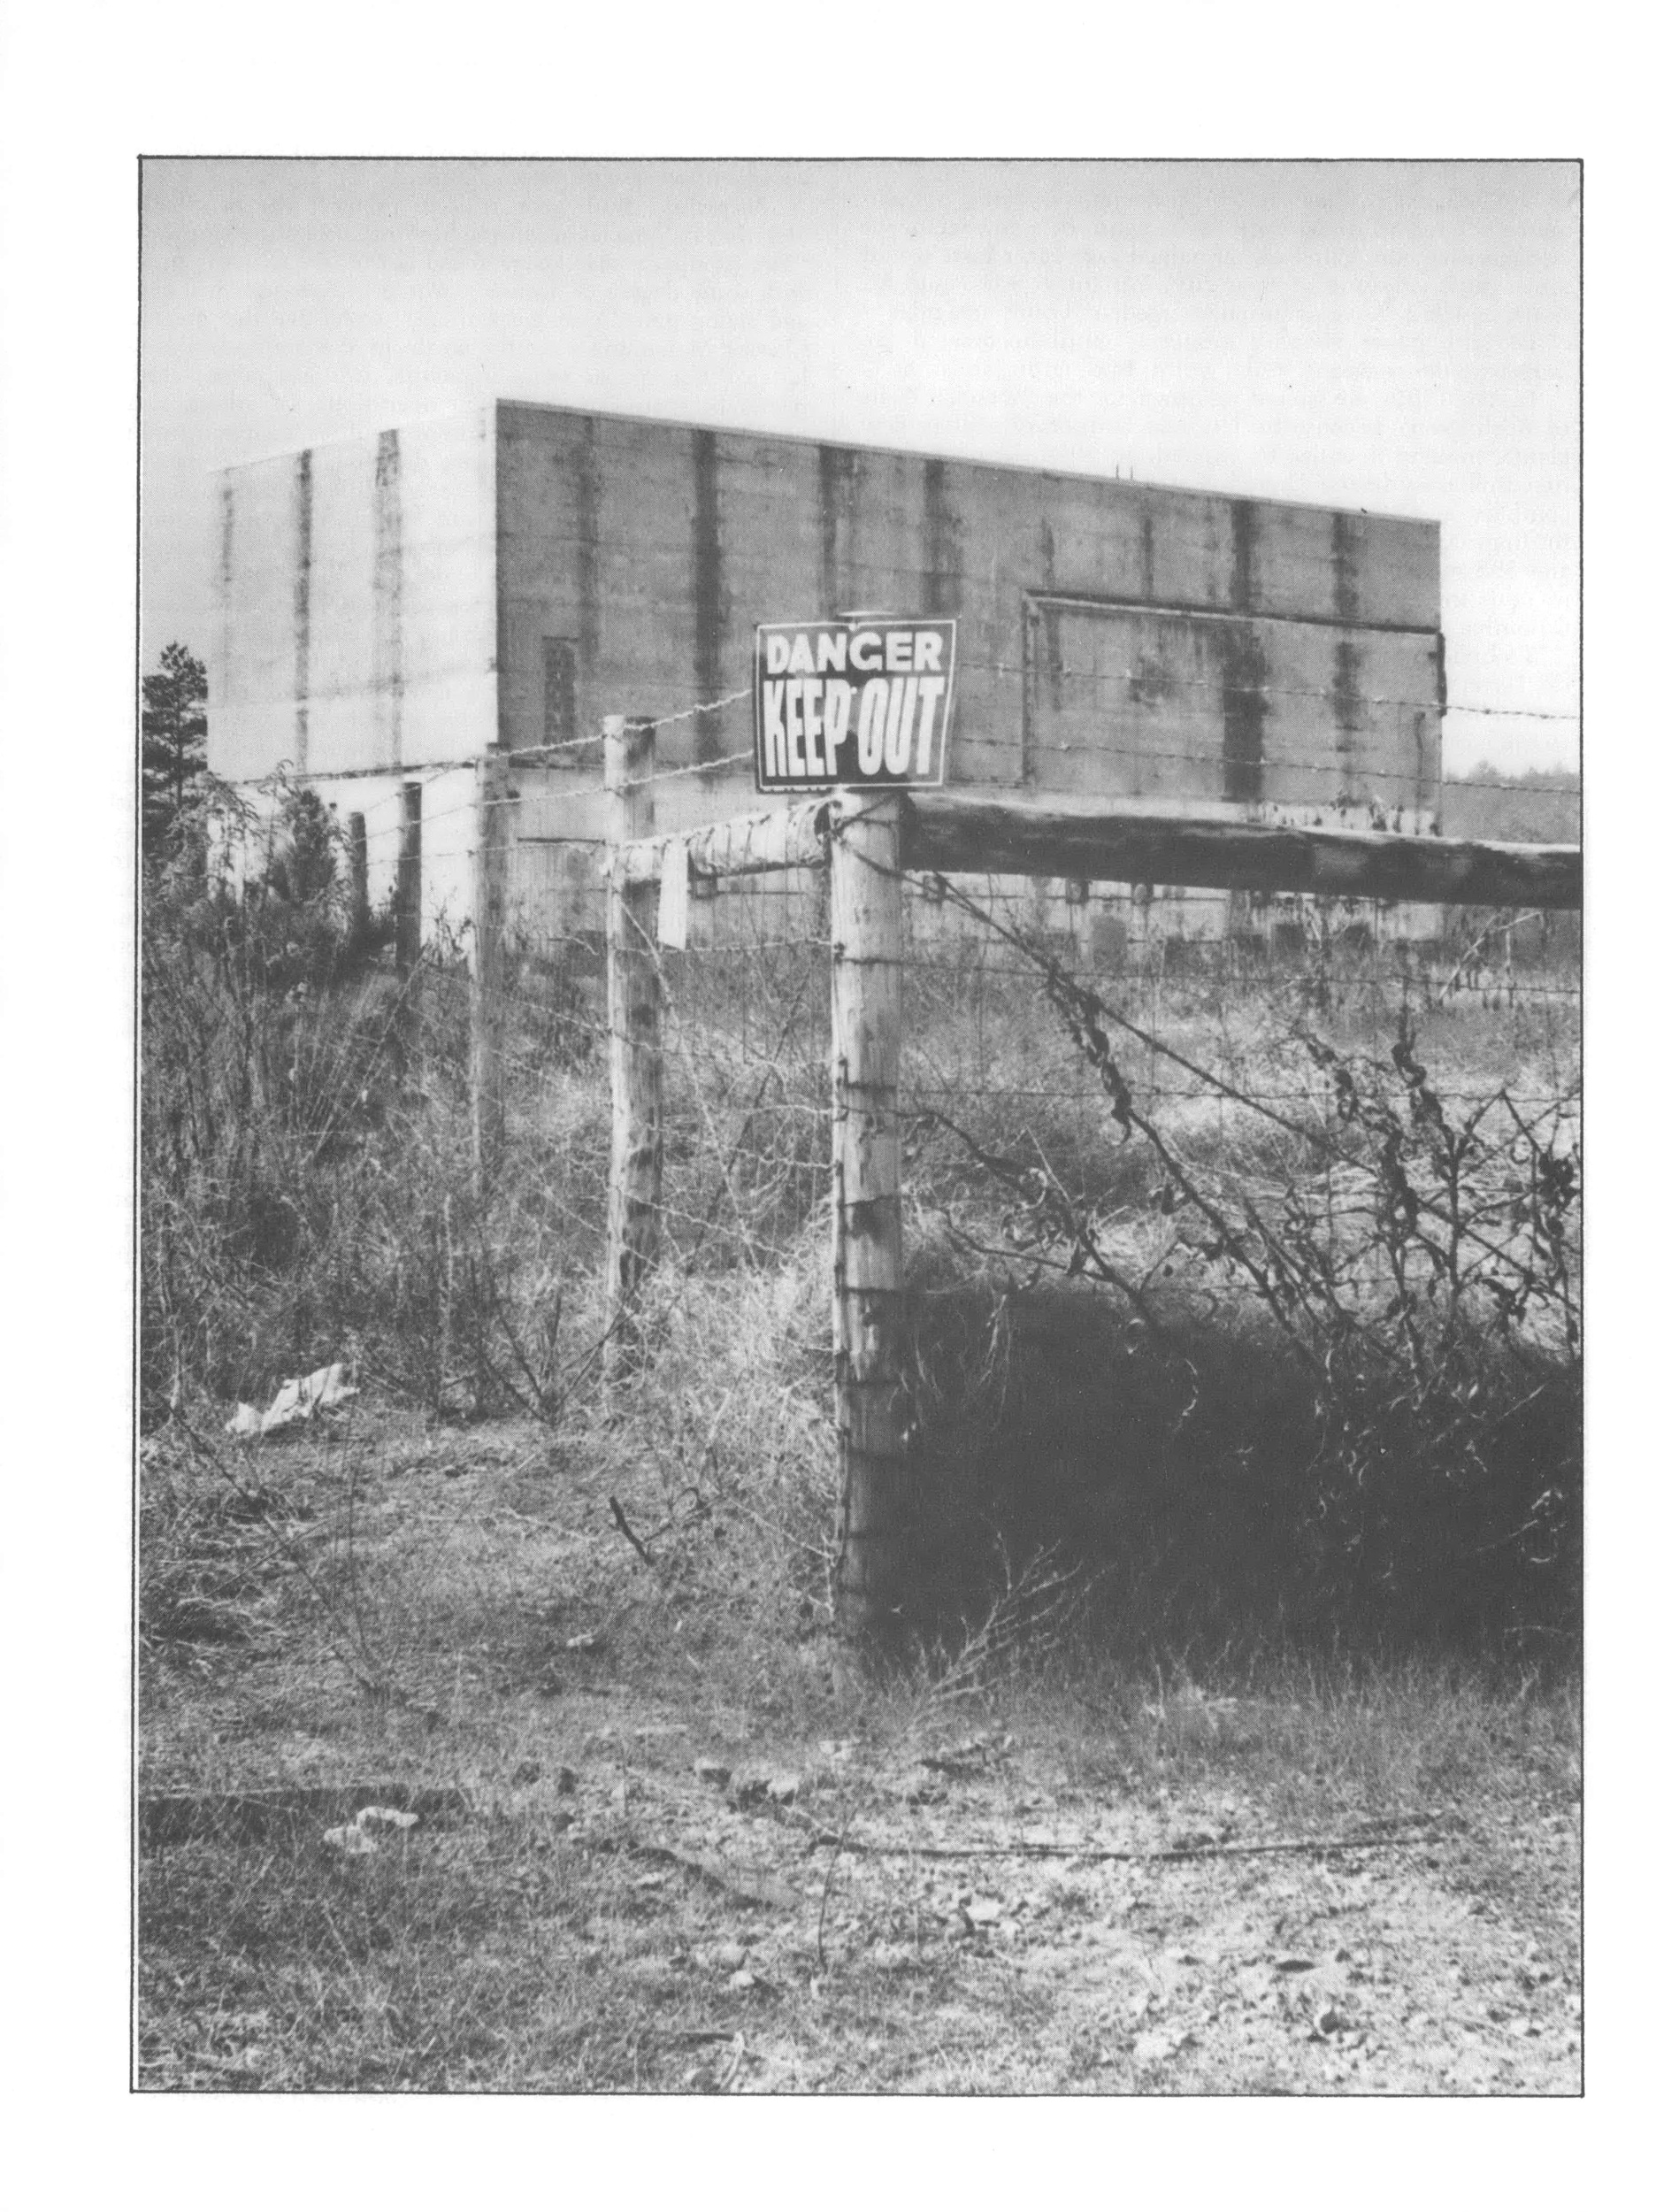 Black and white photo of fence with "keep out" sign